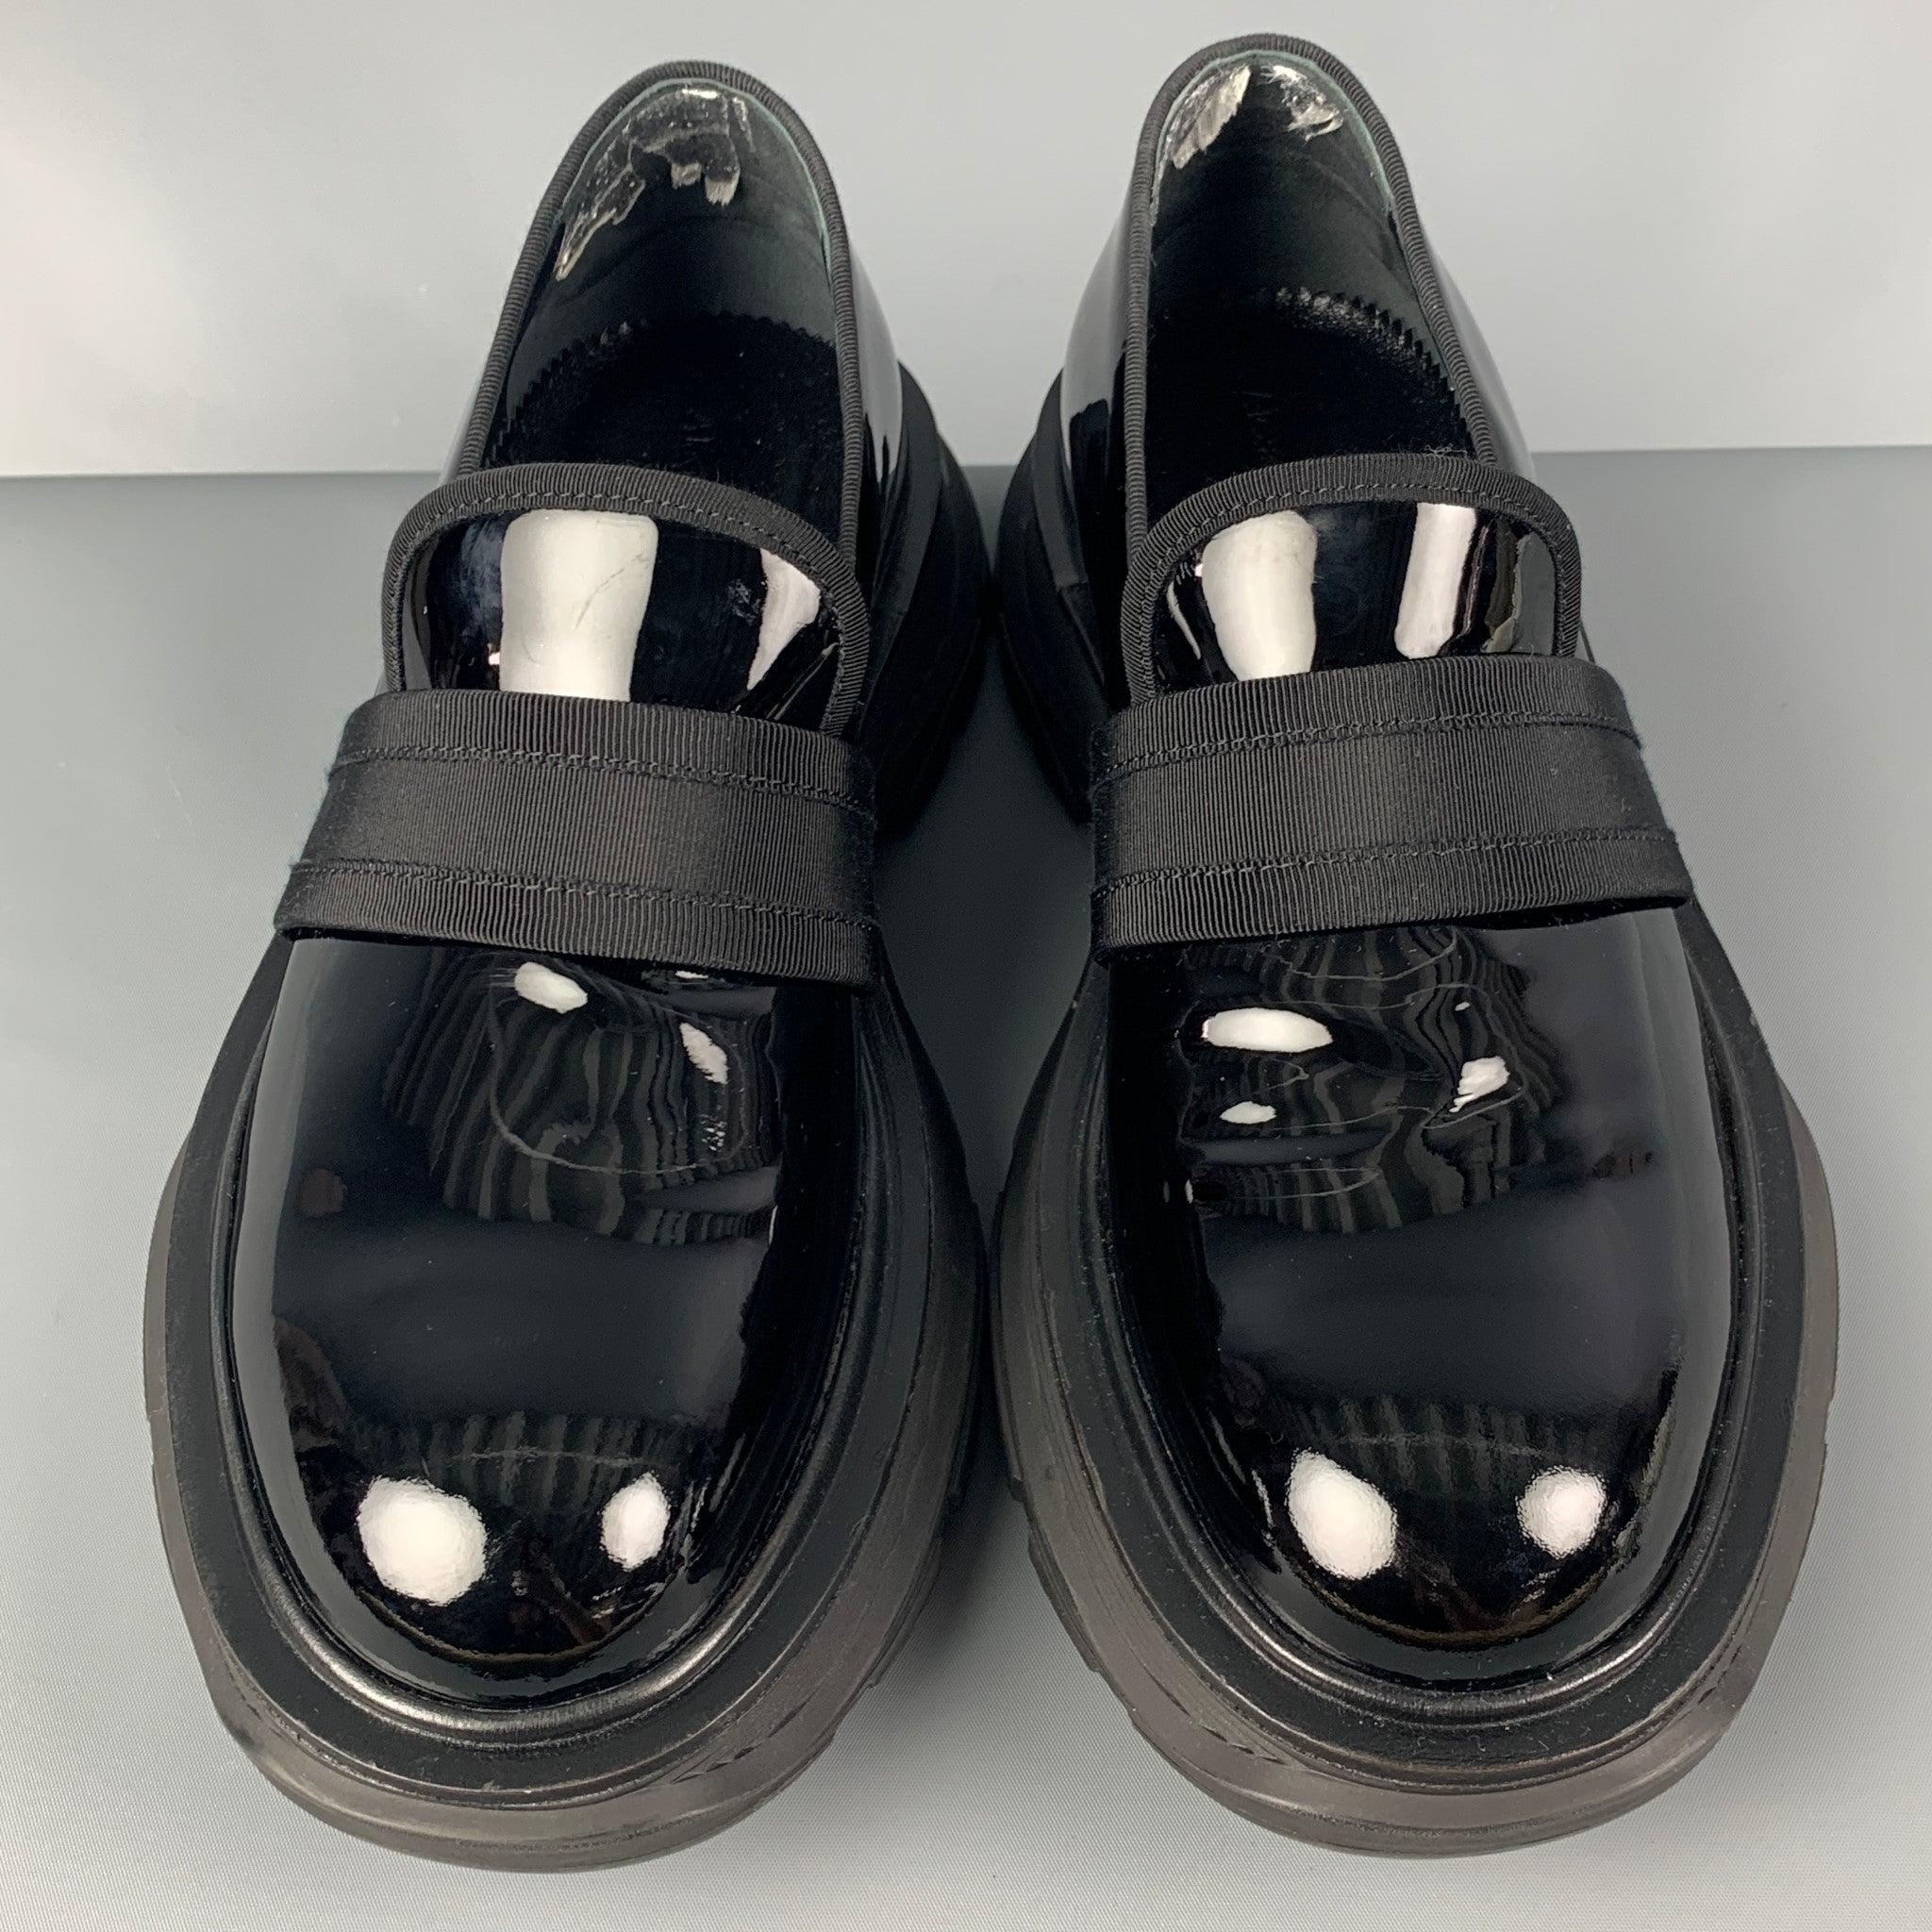 Men's ALEXANDER MCQUEEN Size 9 Black Patent Leather Loafers